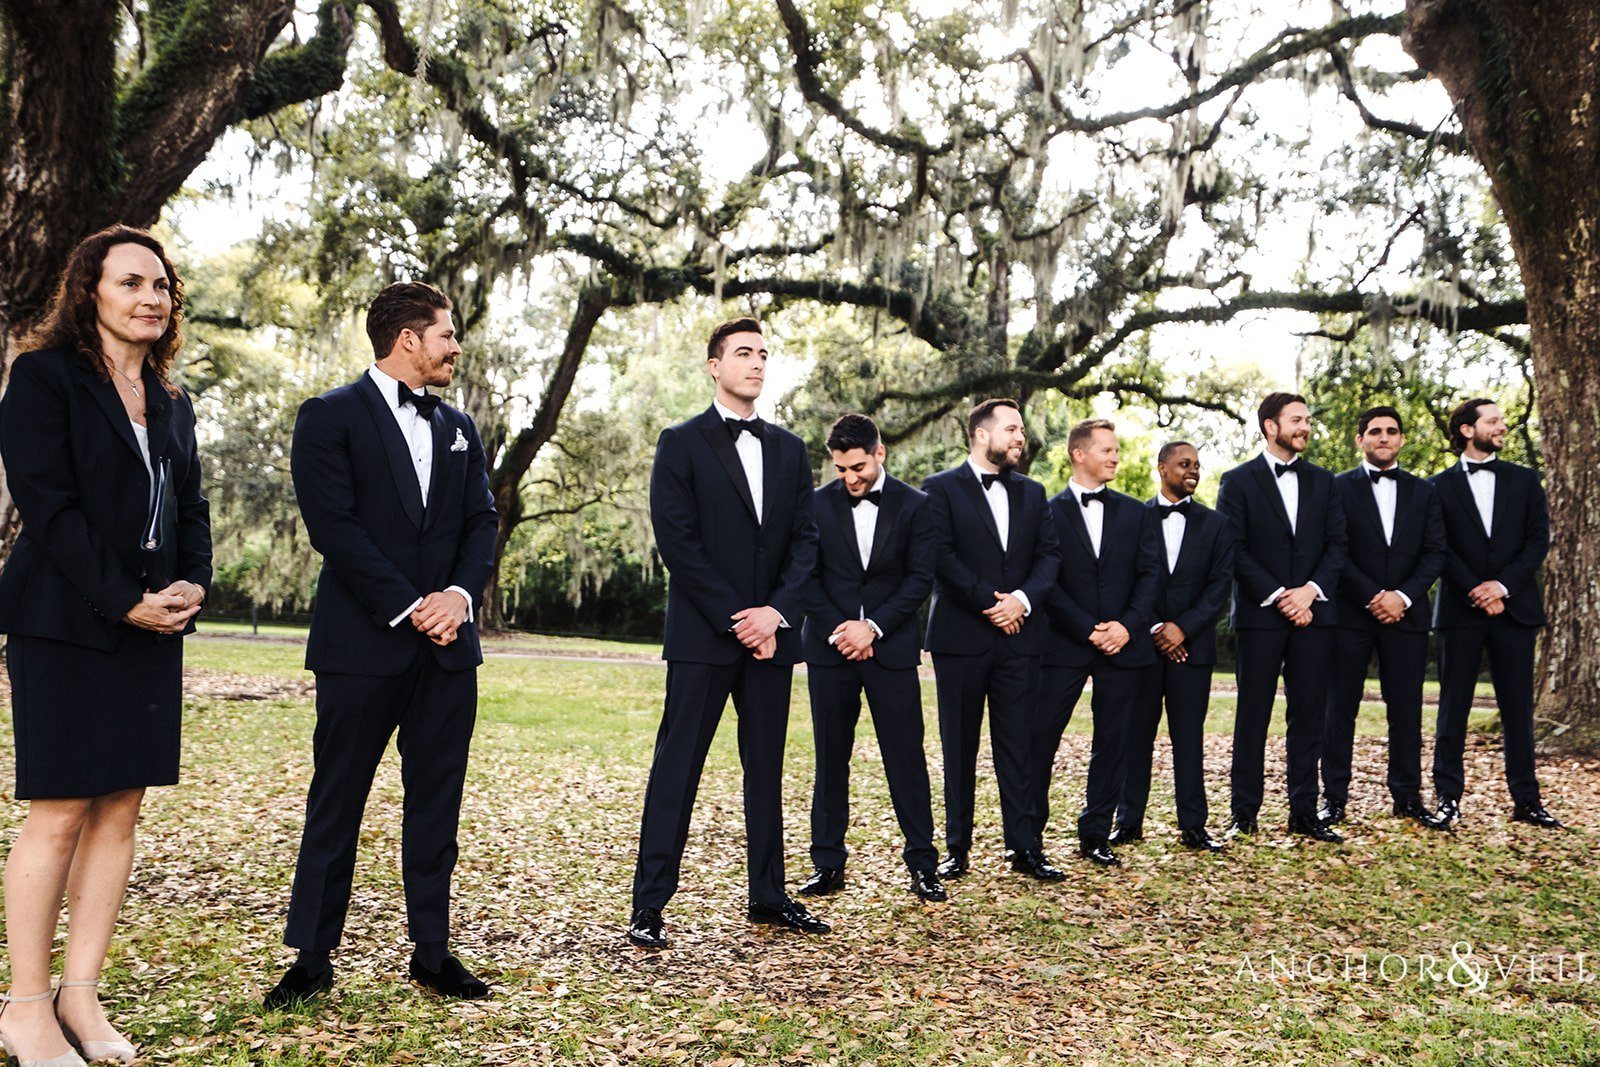 The groom waiting for his bride to arrive during the ceremony at the Boone Hall Plantation Wedding 